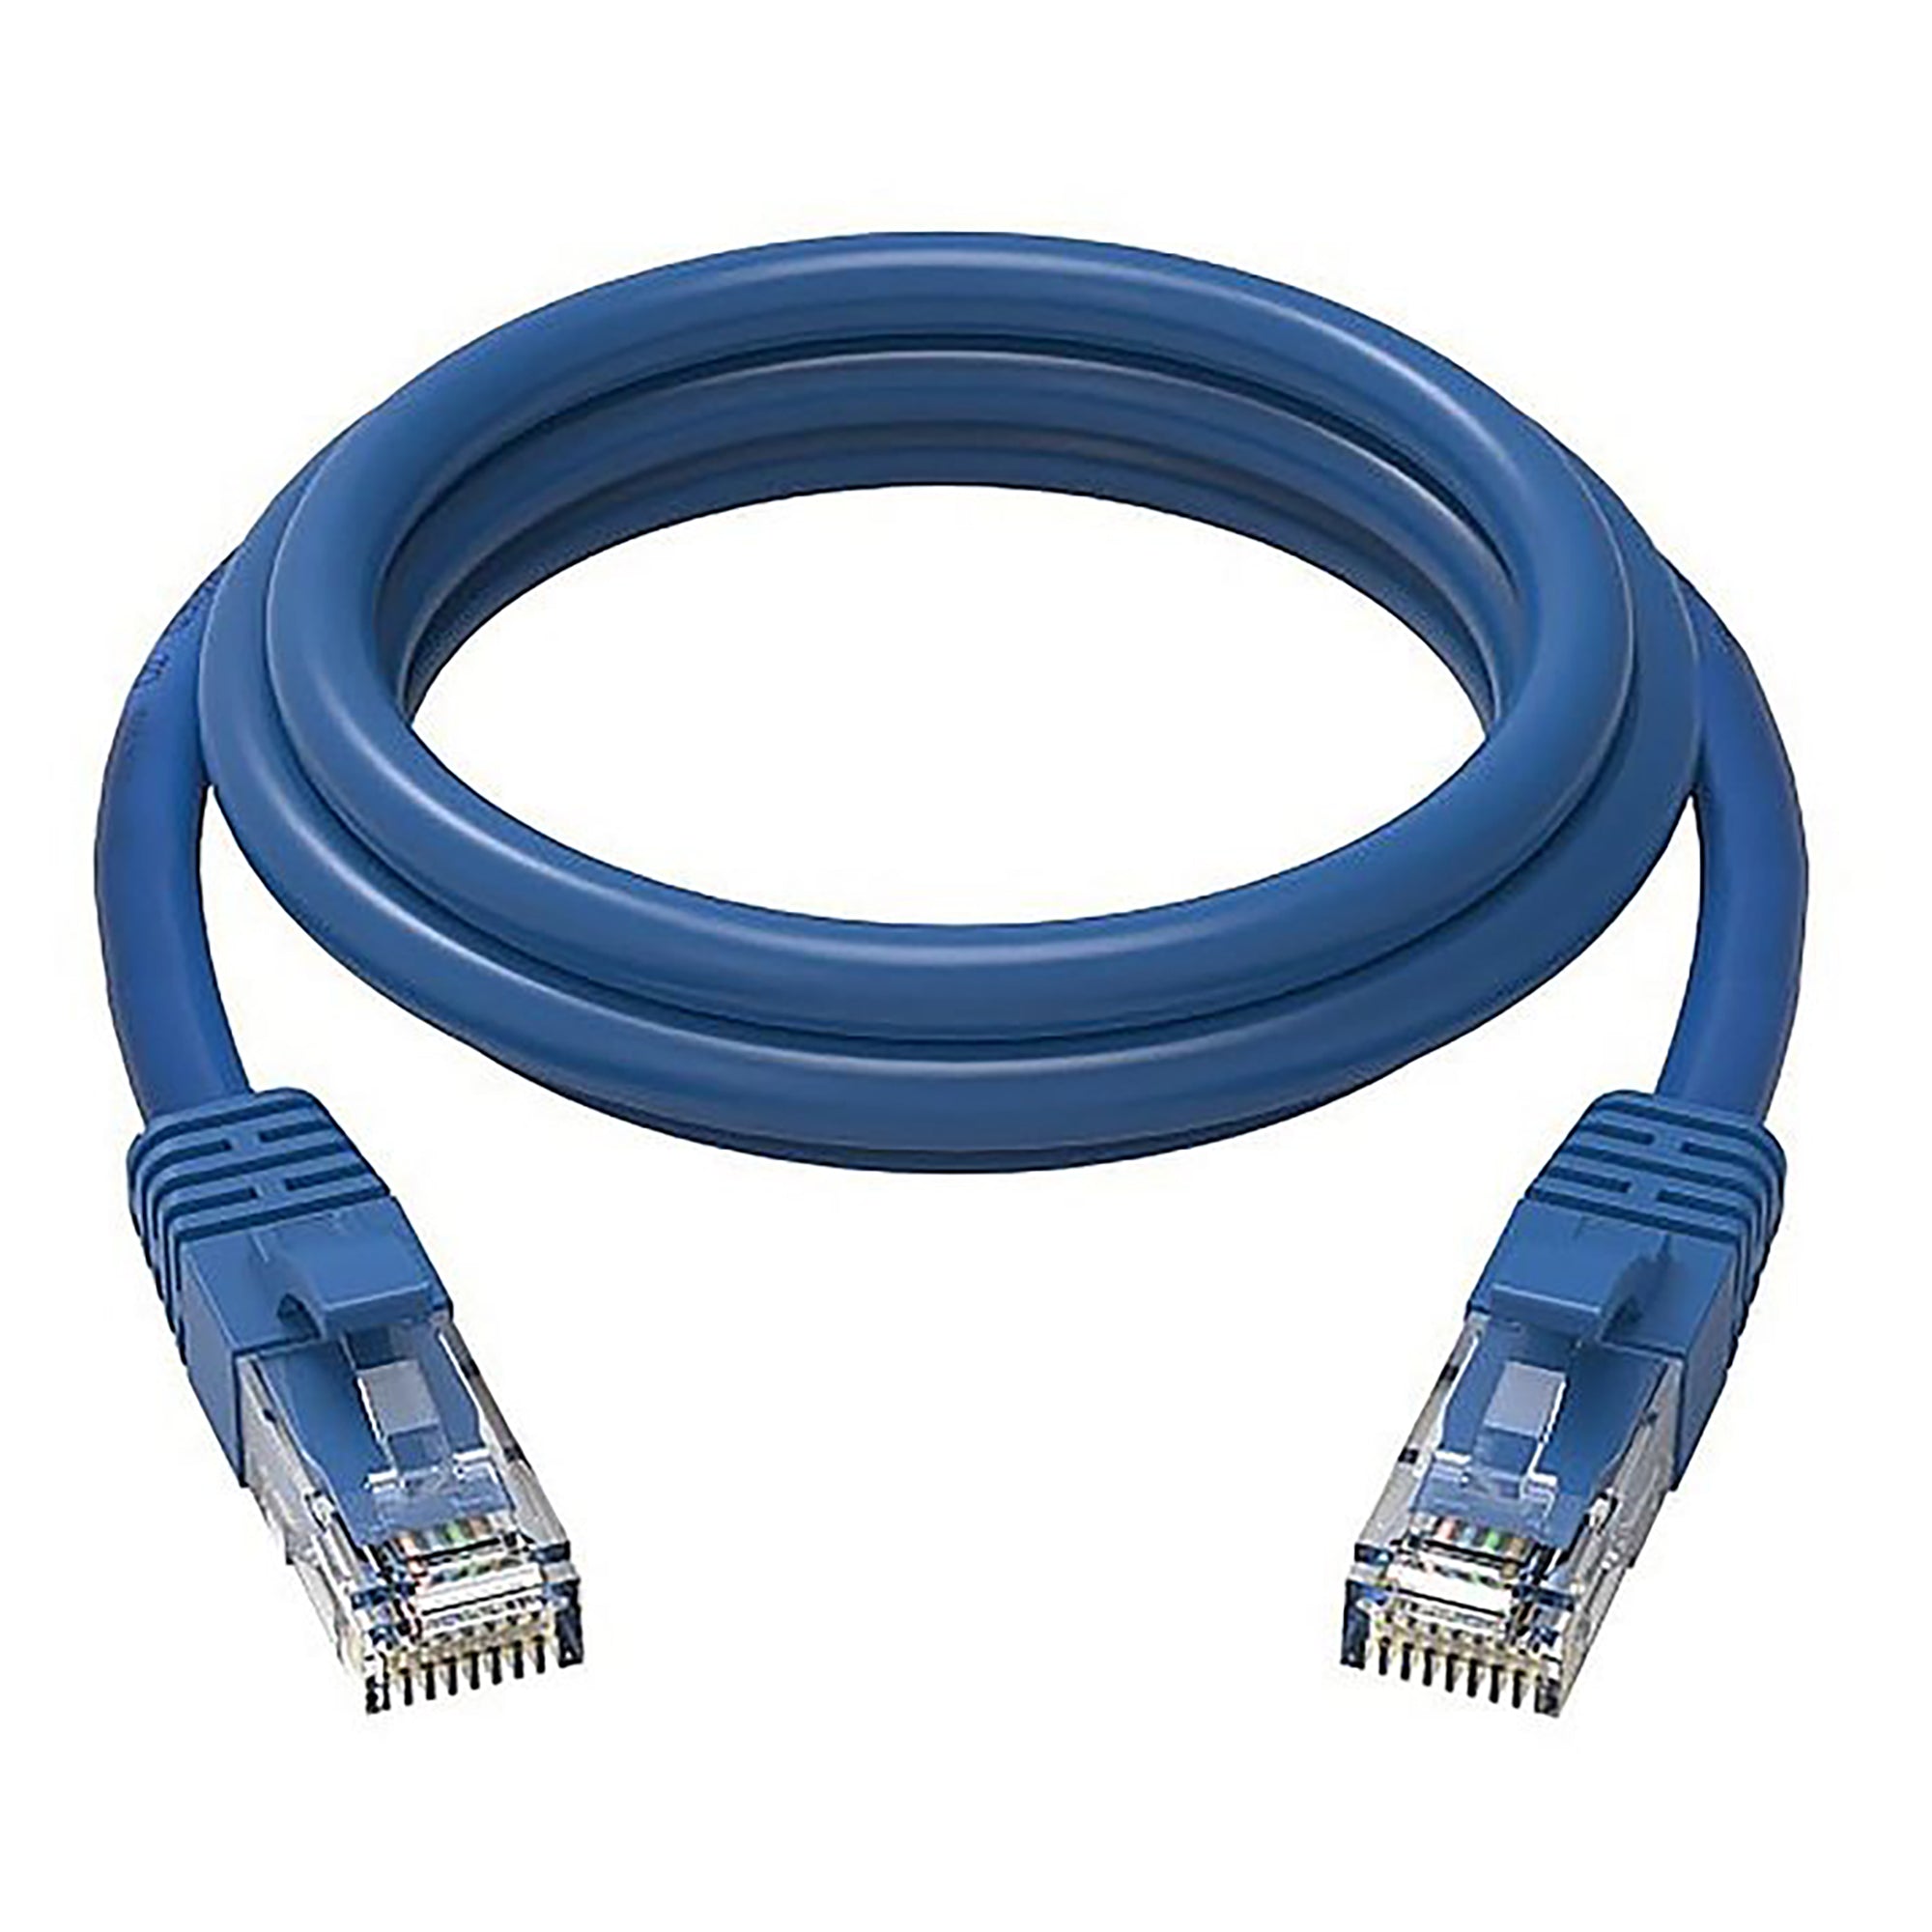 Cruxtec RC6-020-BL CAT6 10GbE Ethernet Cable, Blue (2 mtrs)